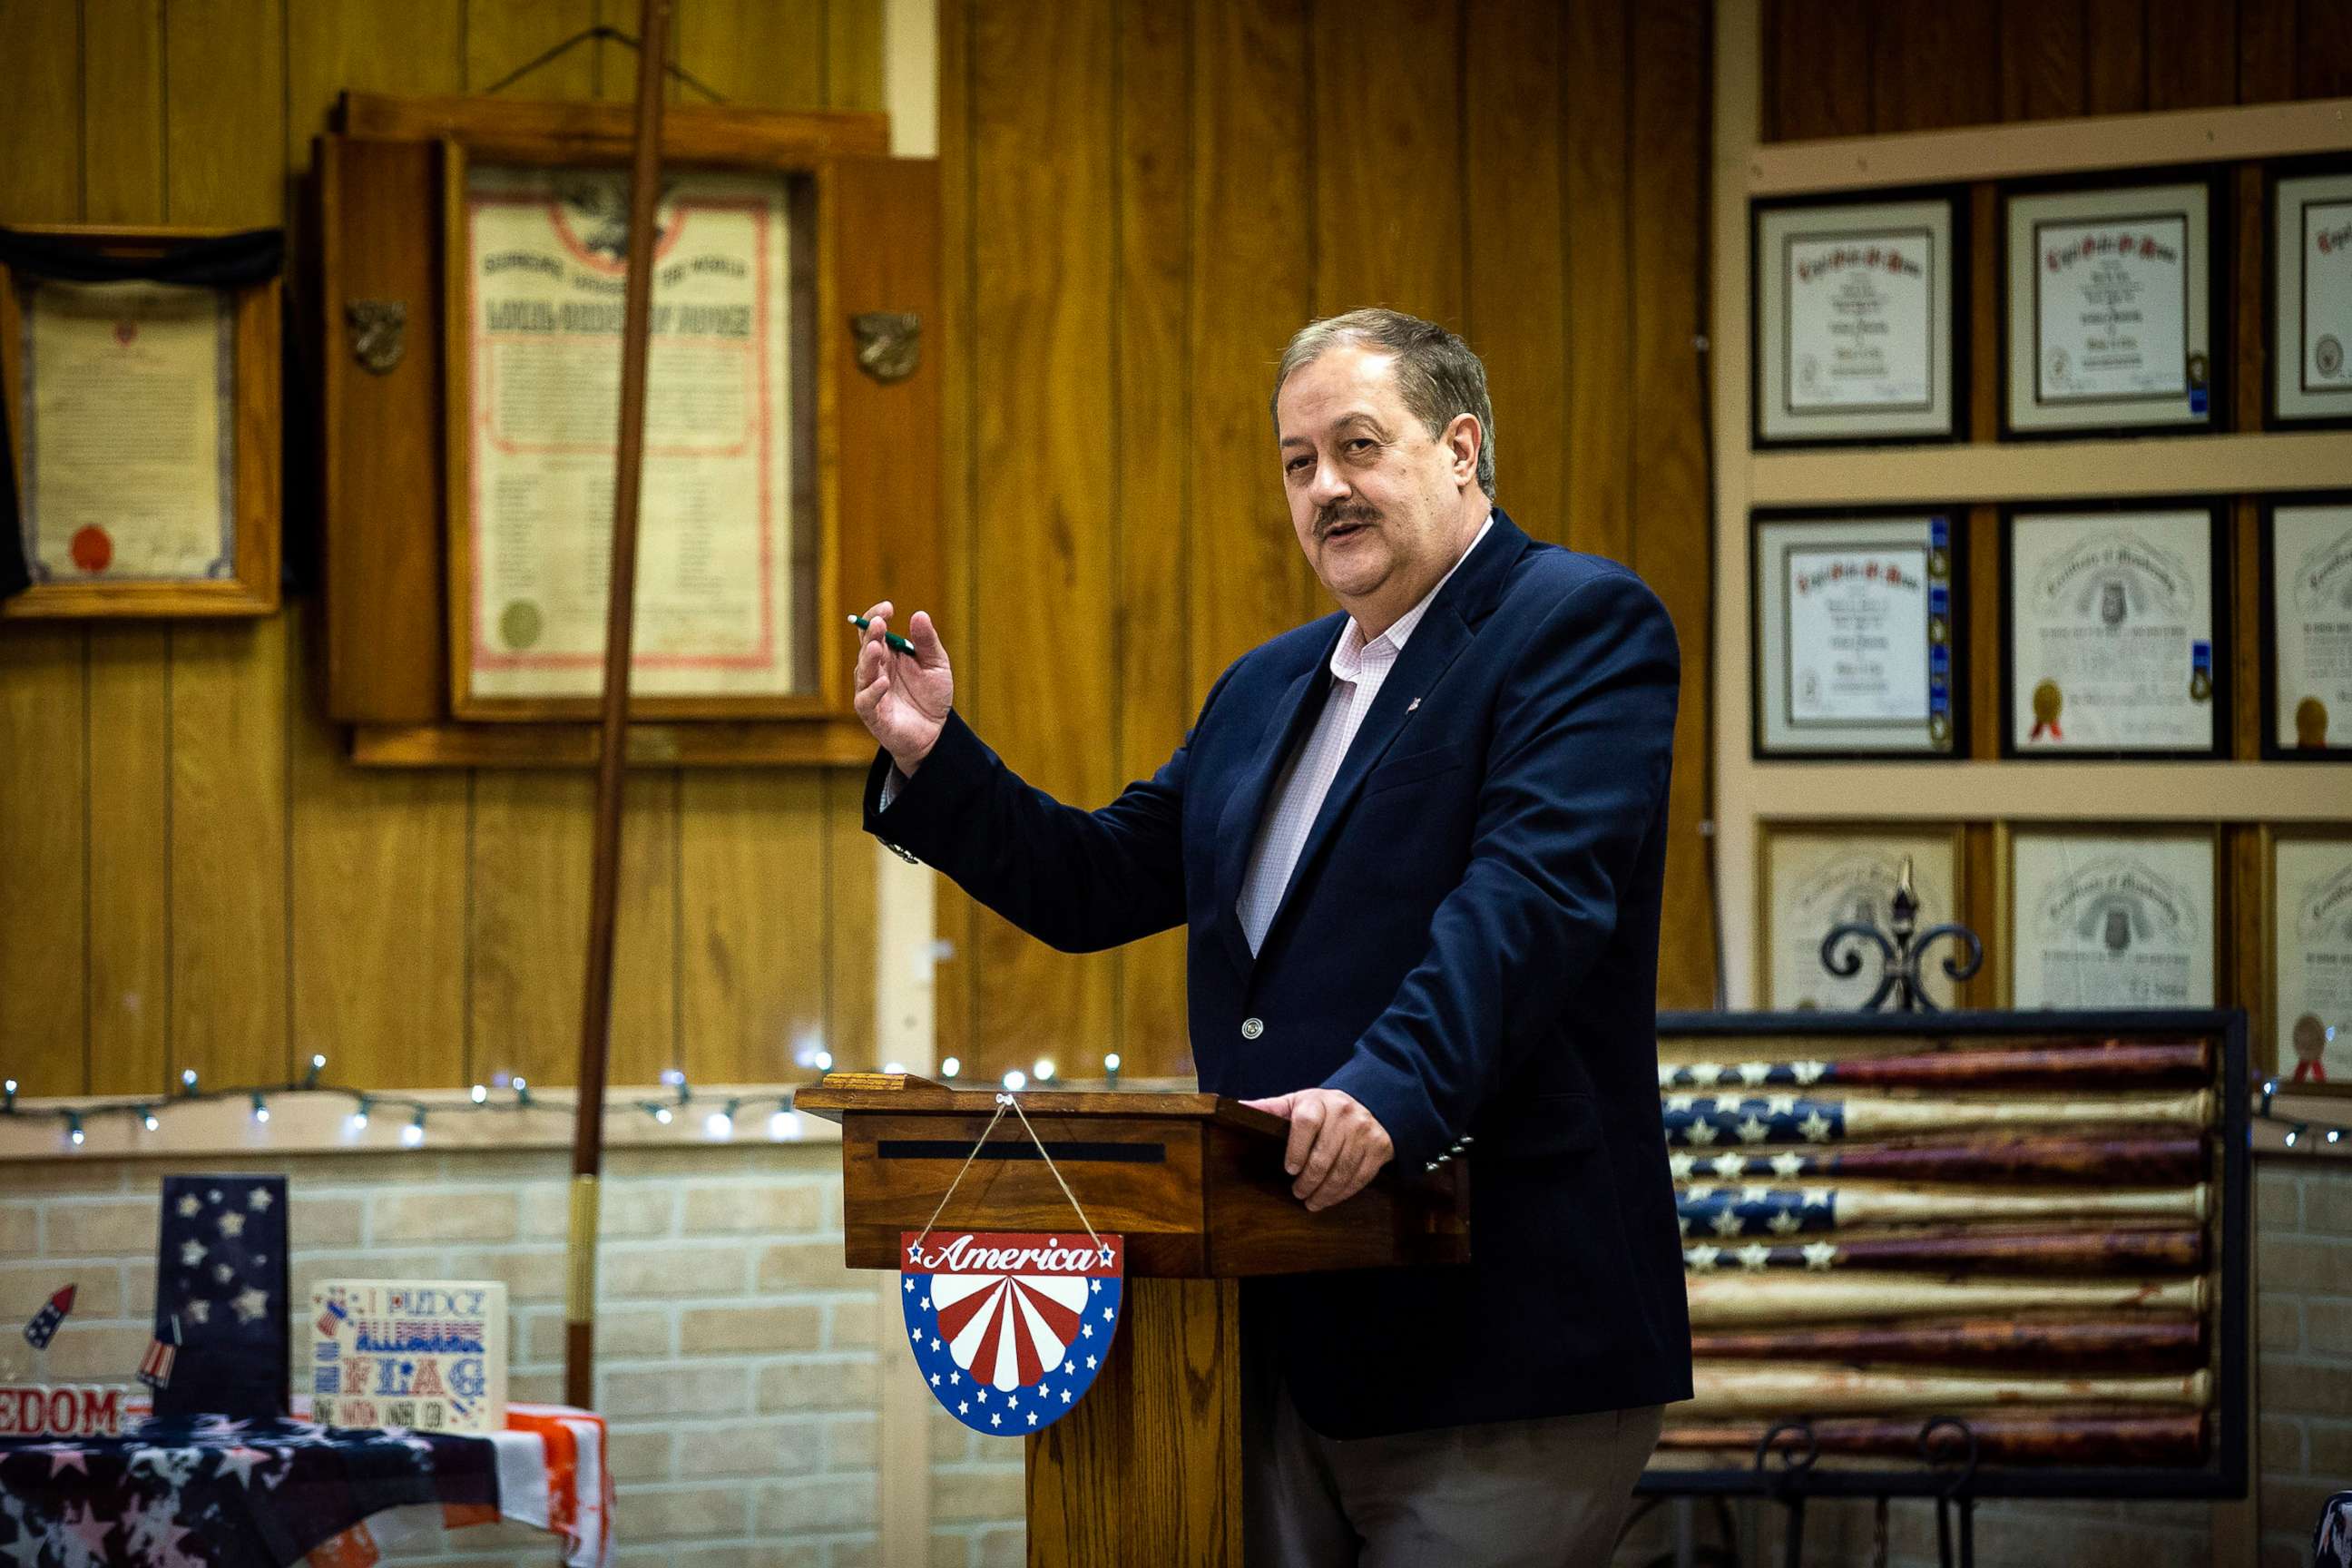 PHOTO: Don Blankenship, a former West Virginia coal mining executive and current Republican Senate candidate, campaigns in Keyser, W. Va., on April 20, 2018.